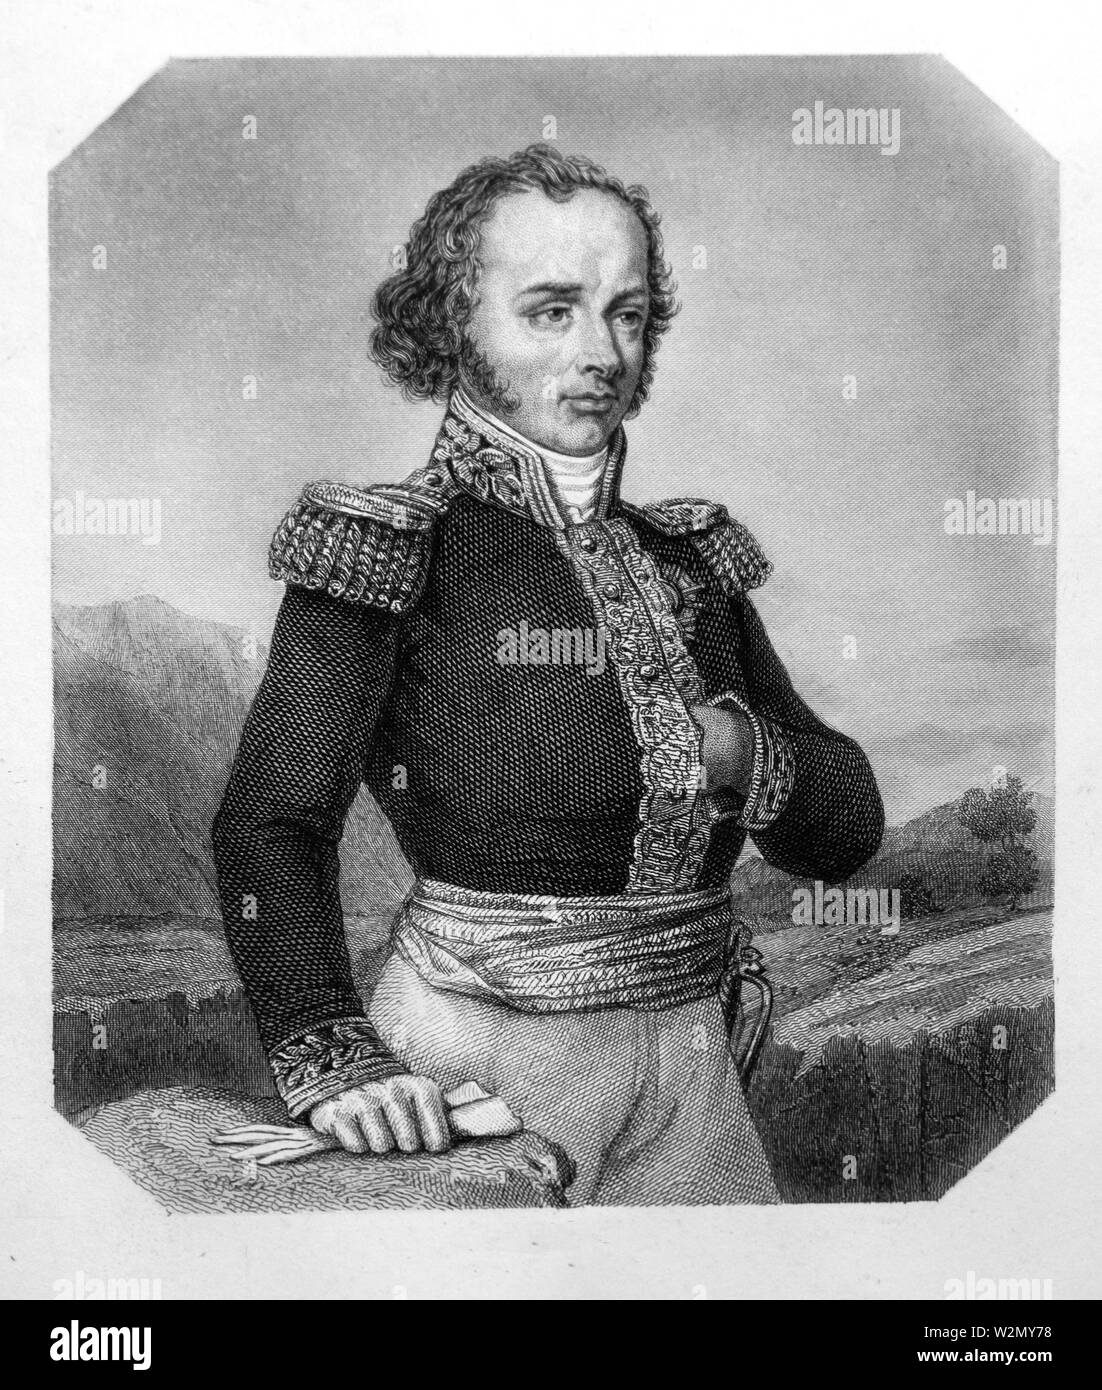 Maximilien Sébastien Foy.Maximilien Sébastien Foy (3 February 1775-28 November 1825) was a French military leader, statesman and writer. Stock Photo